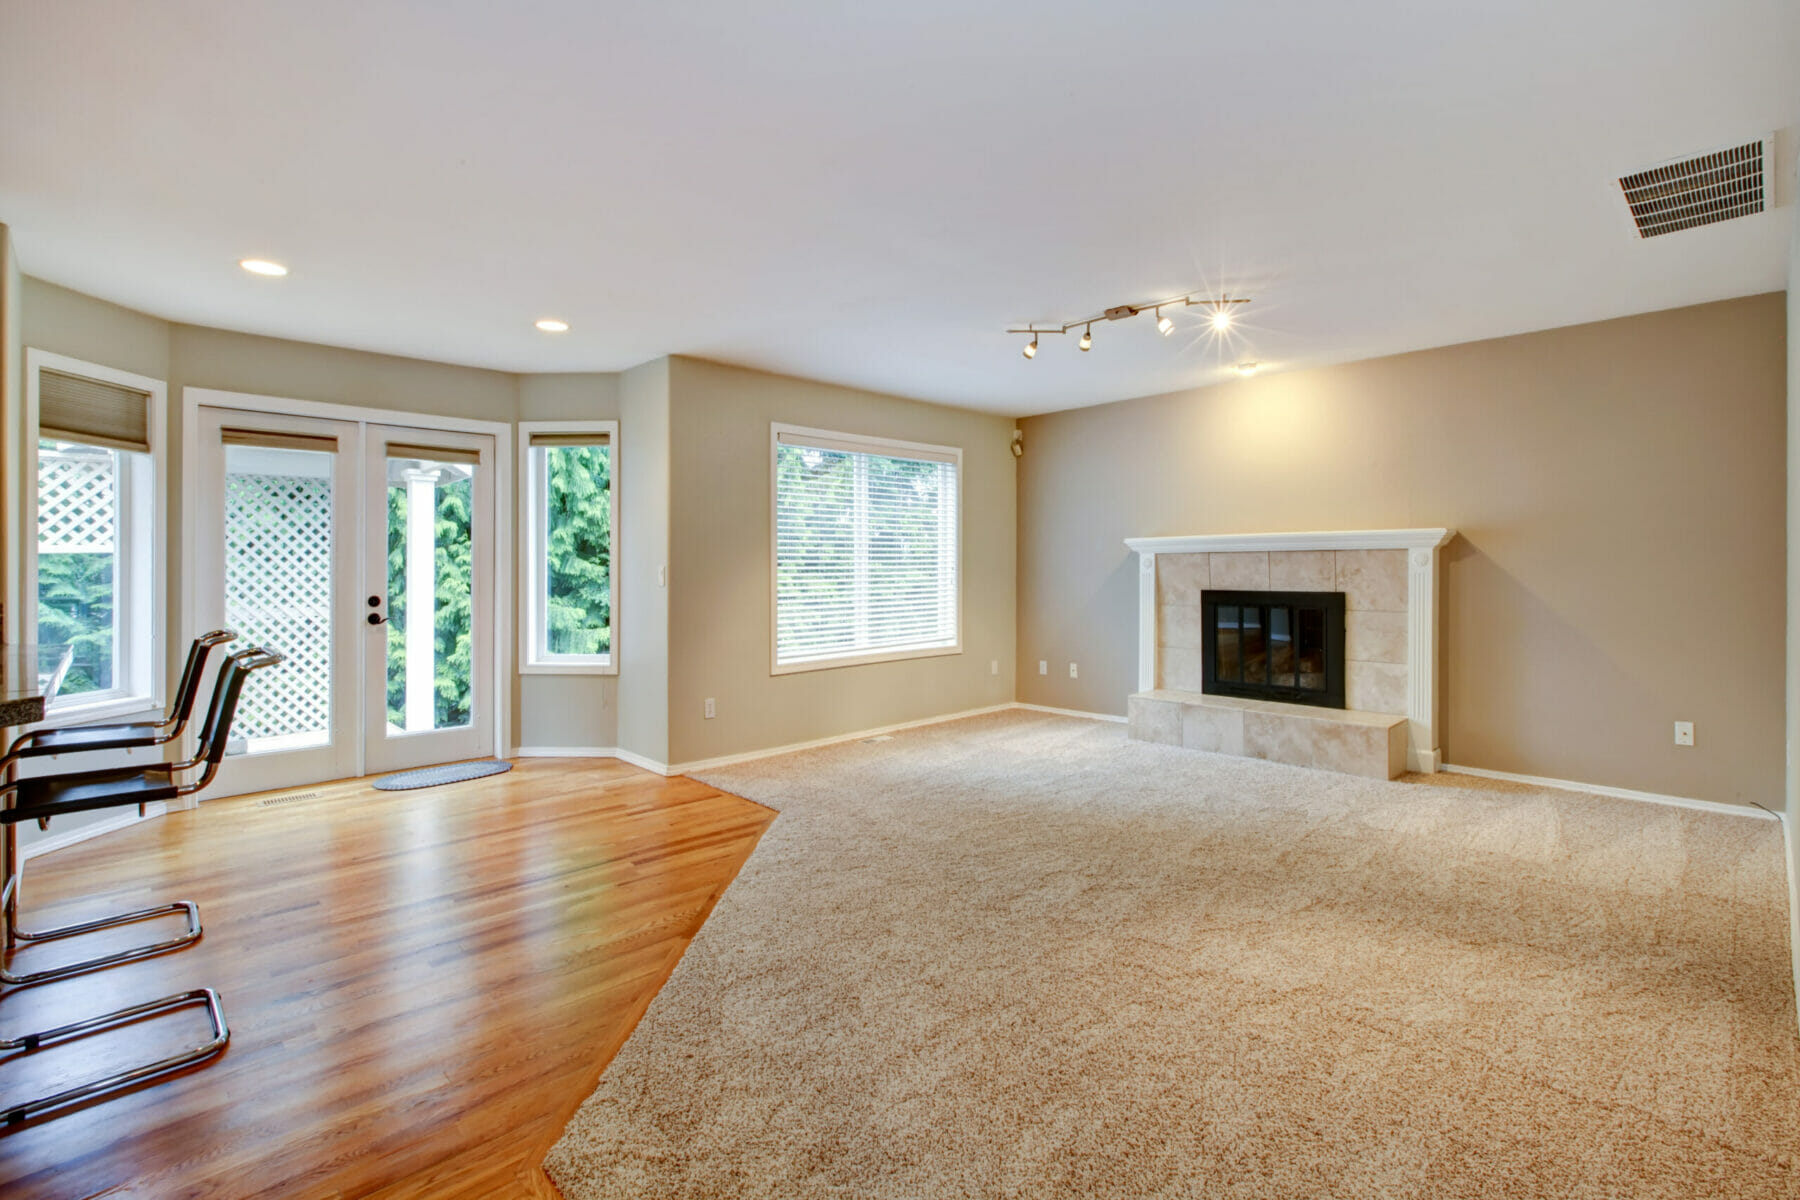 Large bright new living room with fireplace and beige carpet.